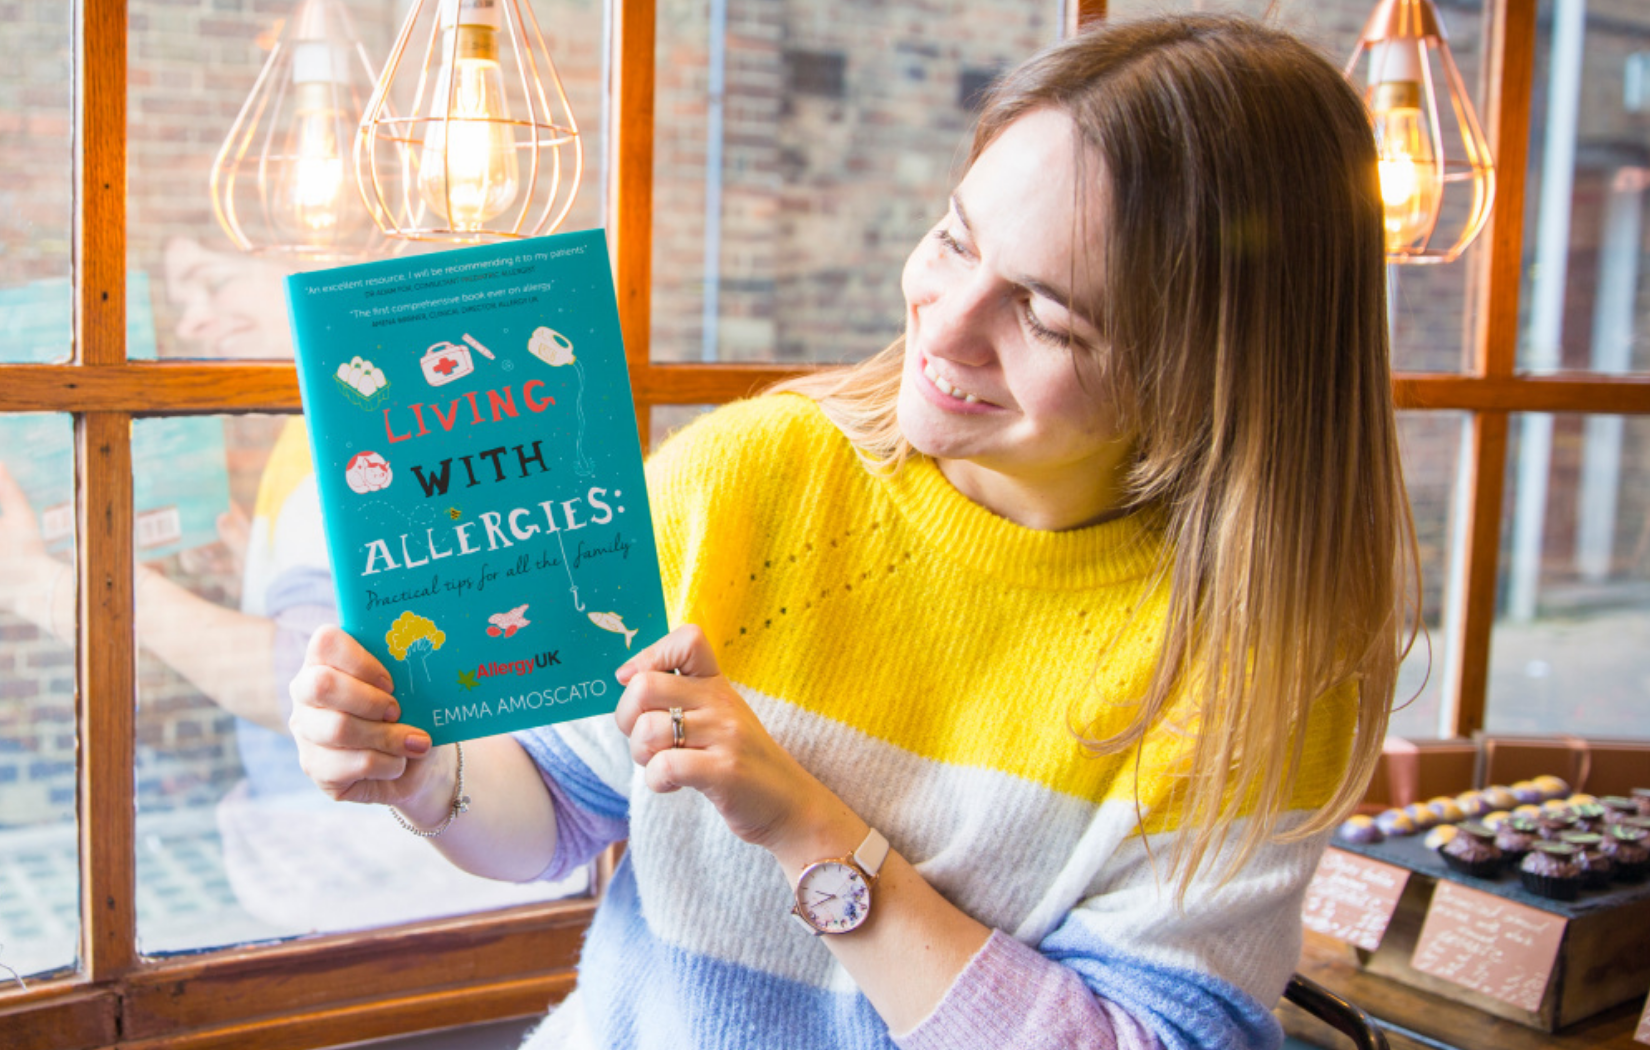 Living with Allergies: Practical Tips for All the Family